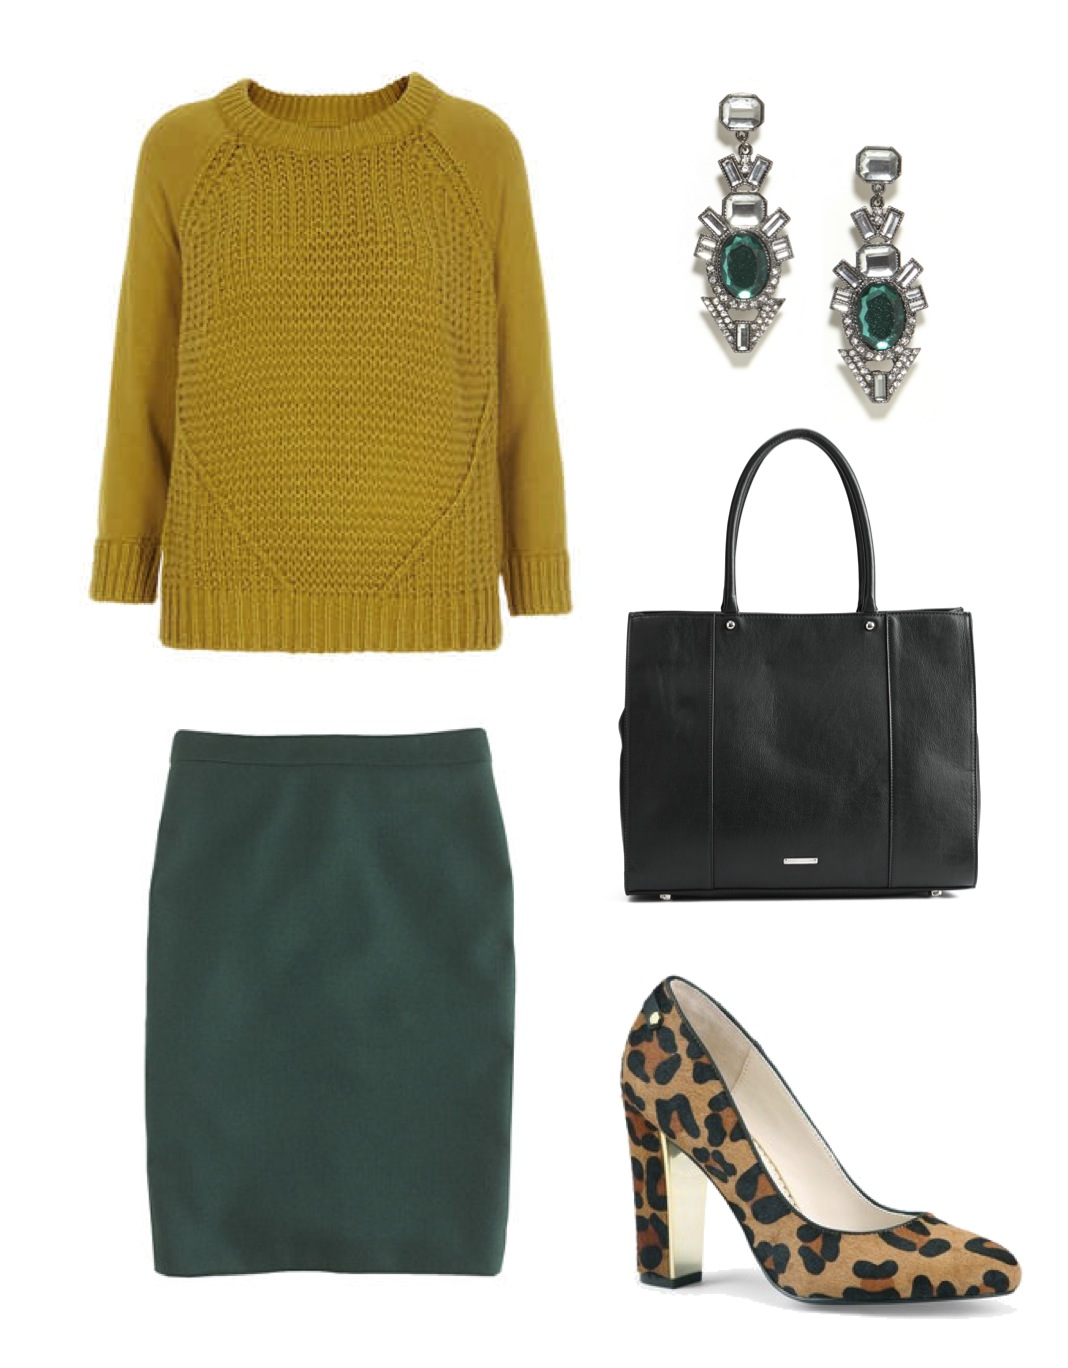 What to Wear: To the Office